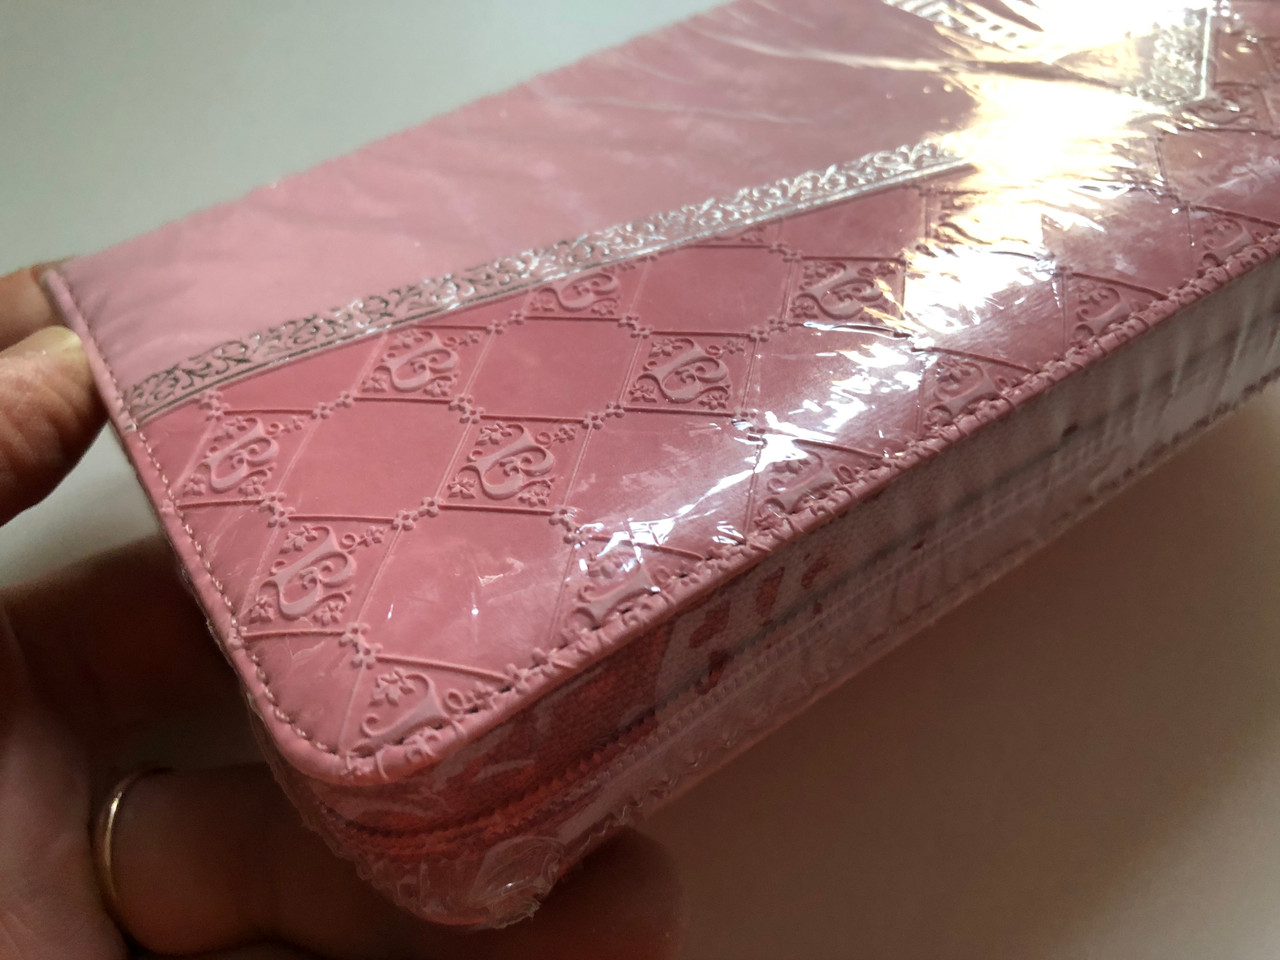 https://cdn10.bigcommerce.com/s-62bdpkt7pb/products/51414/images/261772/Russian_Pink_Holy_Bible_5__42932.1671717806.1280.1280.JPG?c=2